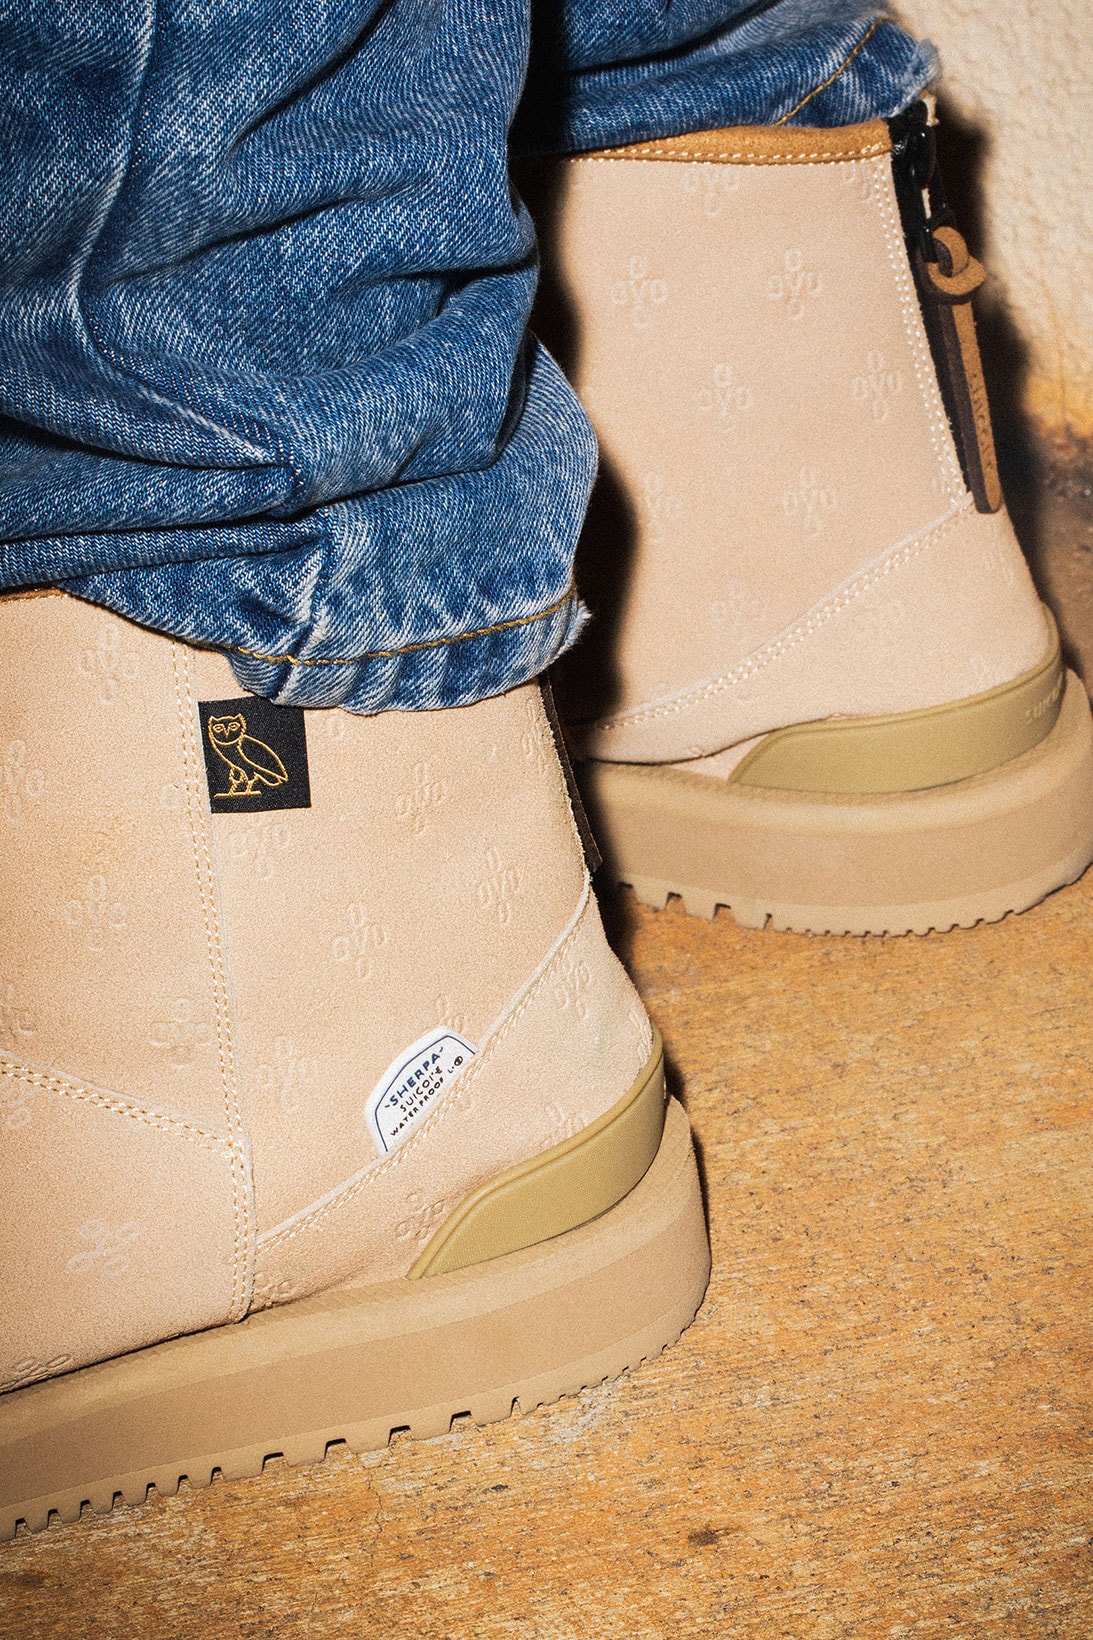 Drake OVO October's Very Own Suicoke Collaboration ELS-M2AB Mid Boots